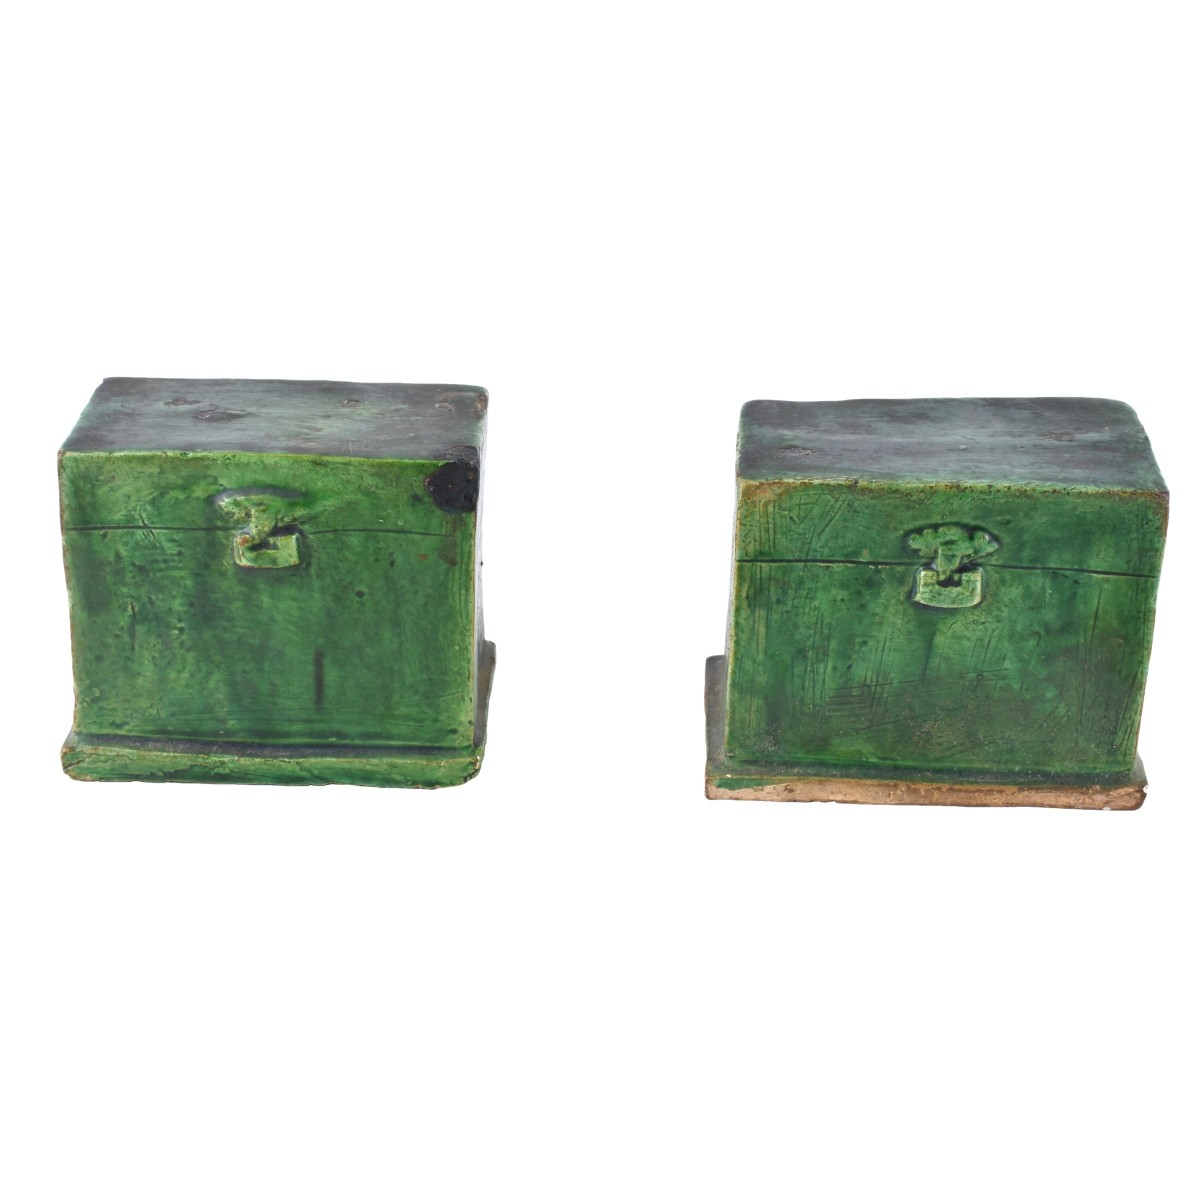 Pair of Antique Green Glazed Funerary Chest Models